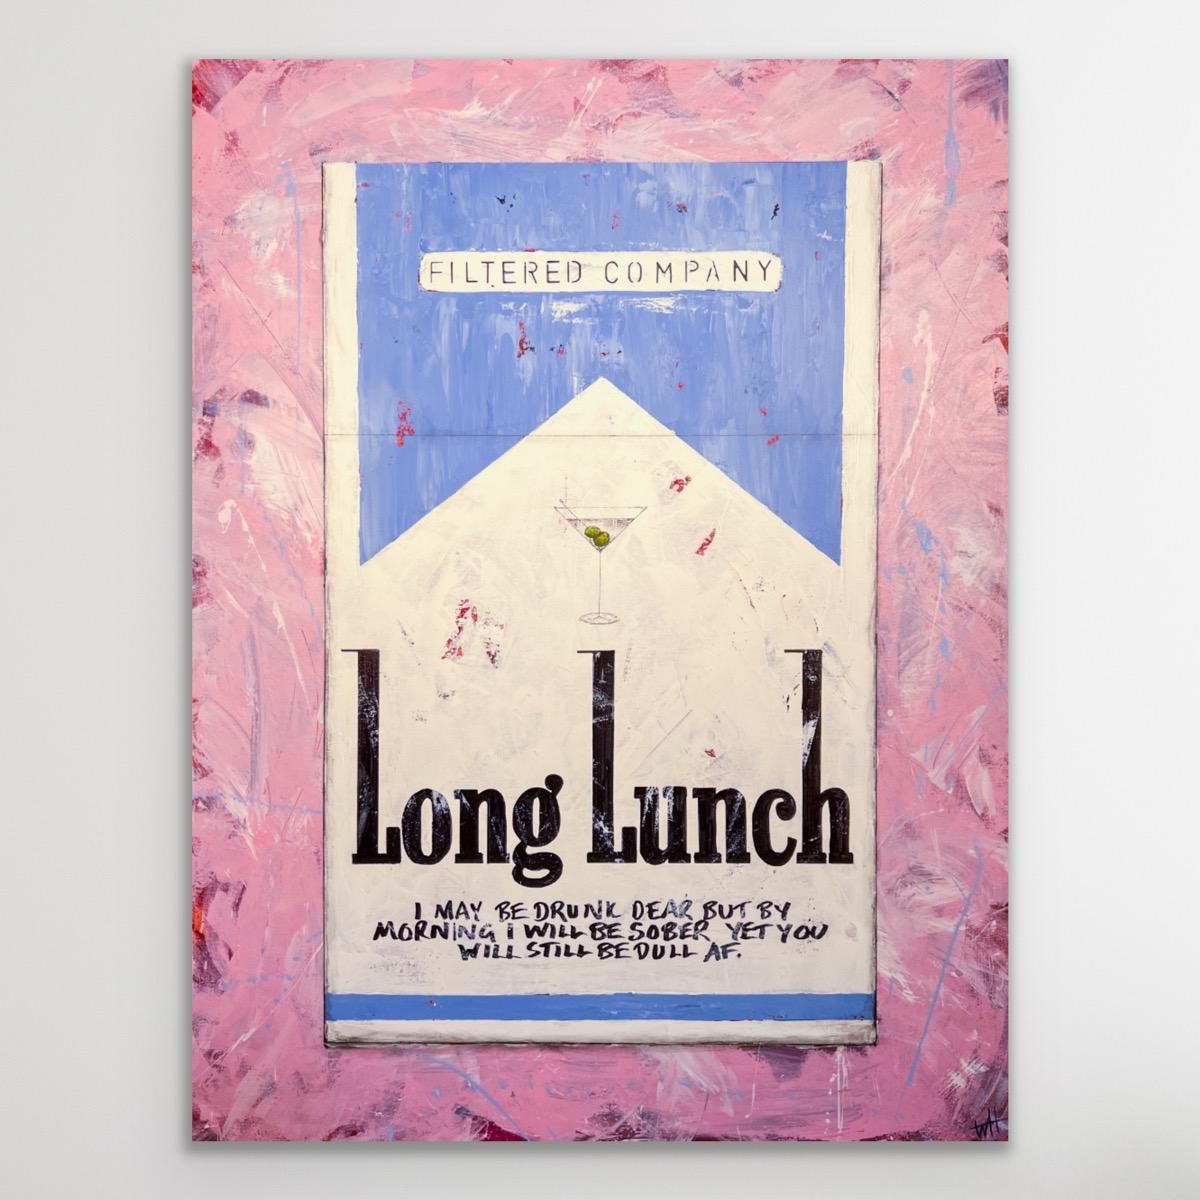 Winston's Long Lunch Dull AF, Original painting, Pop art, Cigarettes - Painting by William Richard Hylton